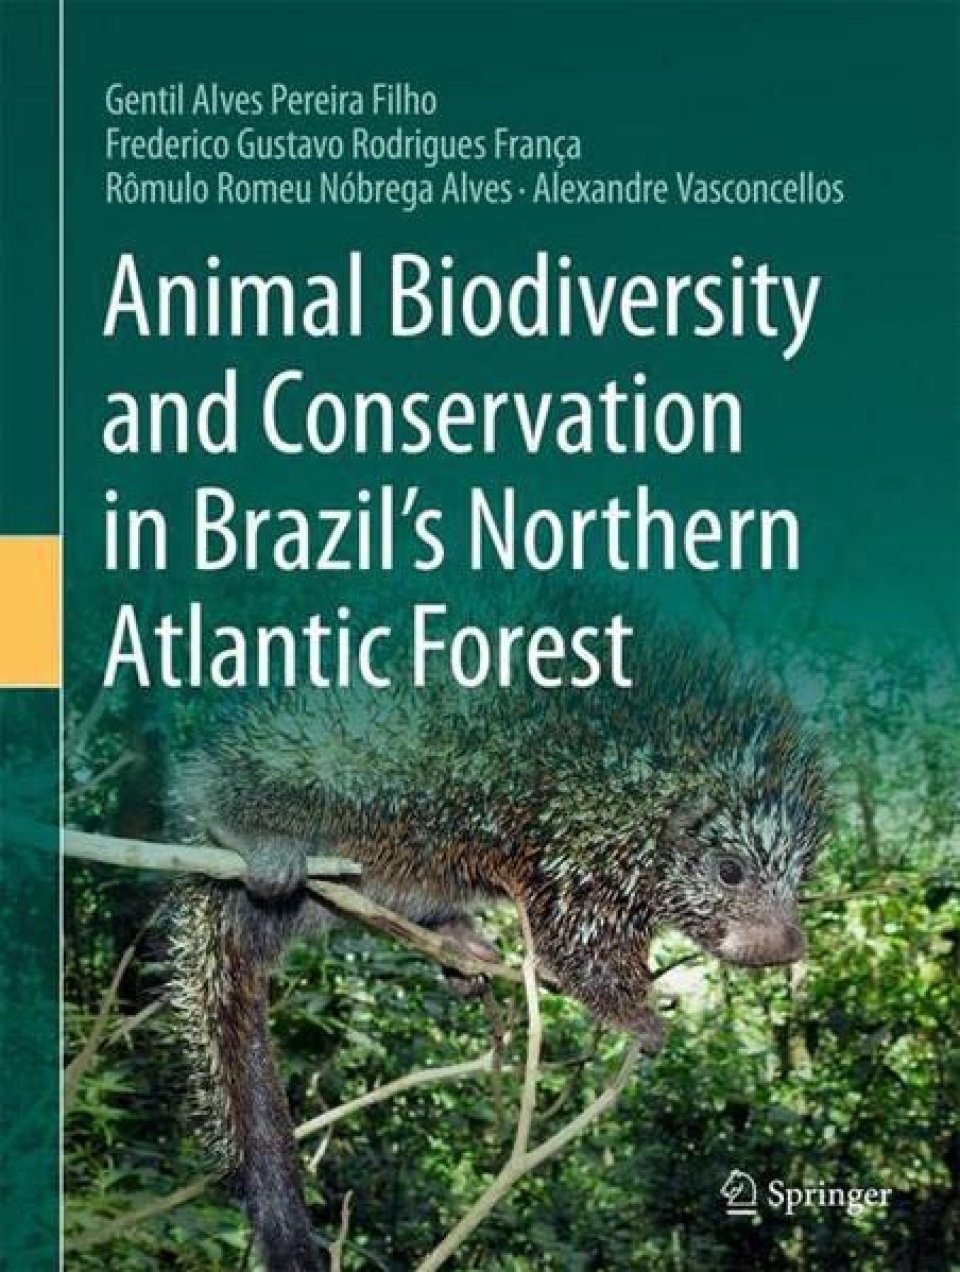 Animal Biodiversity and Conservation in Brazil's Northern Atlantic Forest |  NHBS Academic & Professional Books